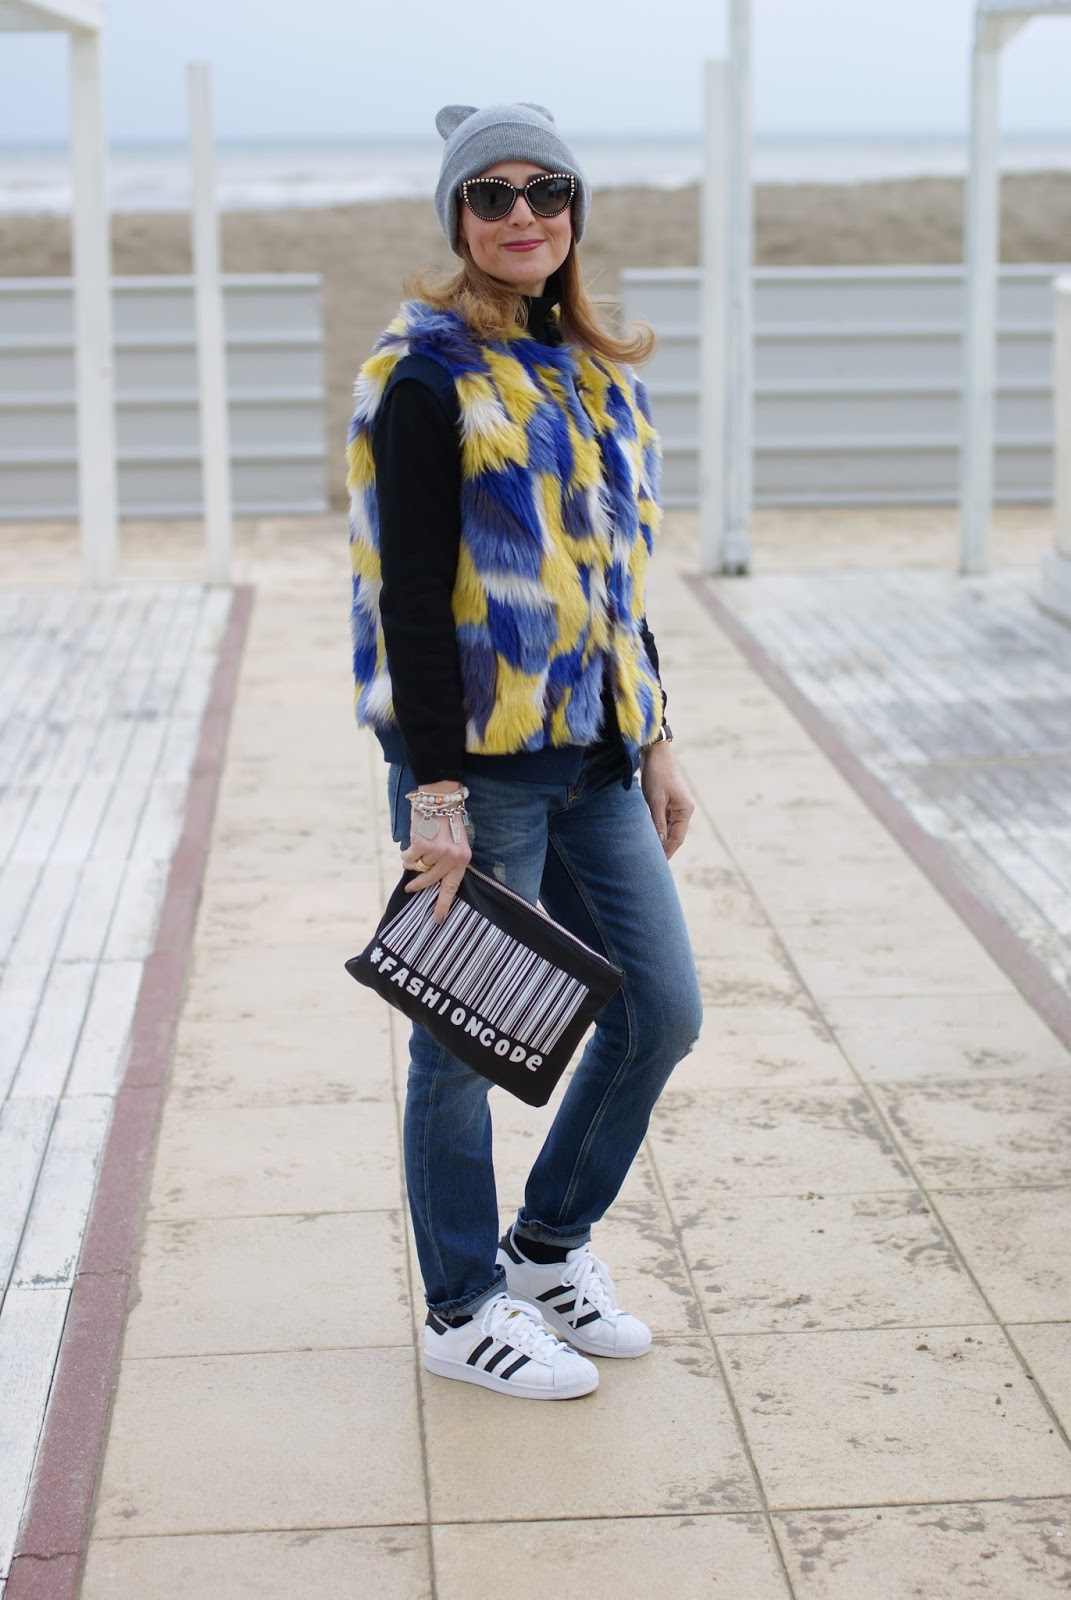 Adidas Superstar, faux fur vest and cat ear beanie on Fashion and Cookies fashion blog, fashion blogger style